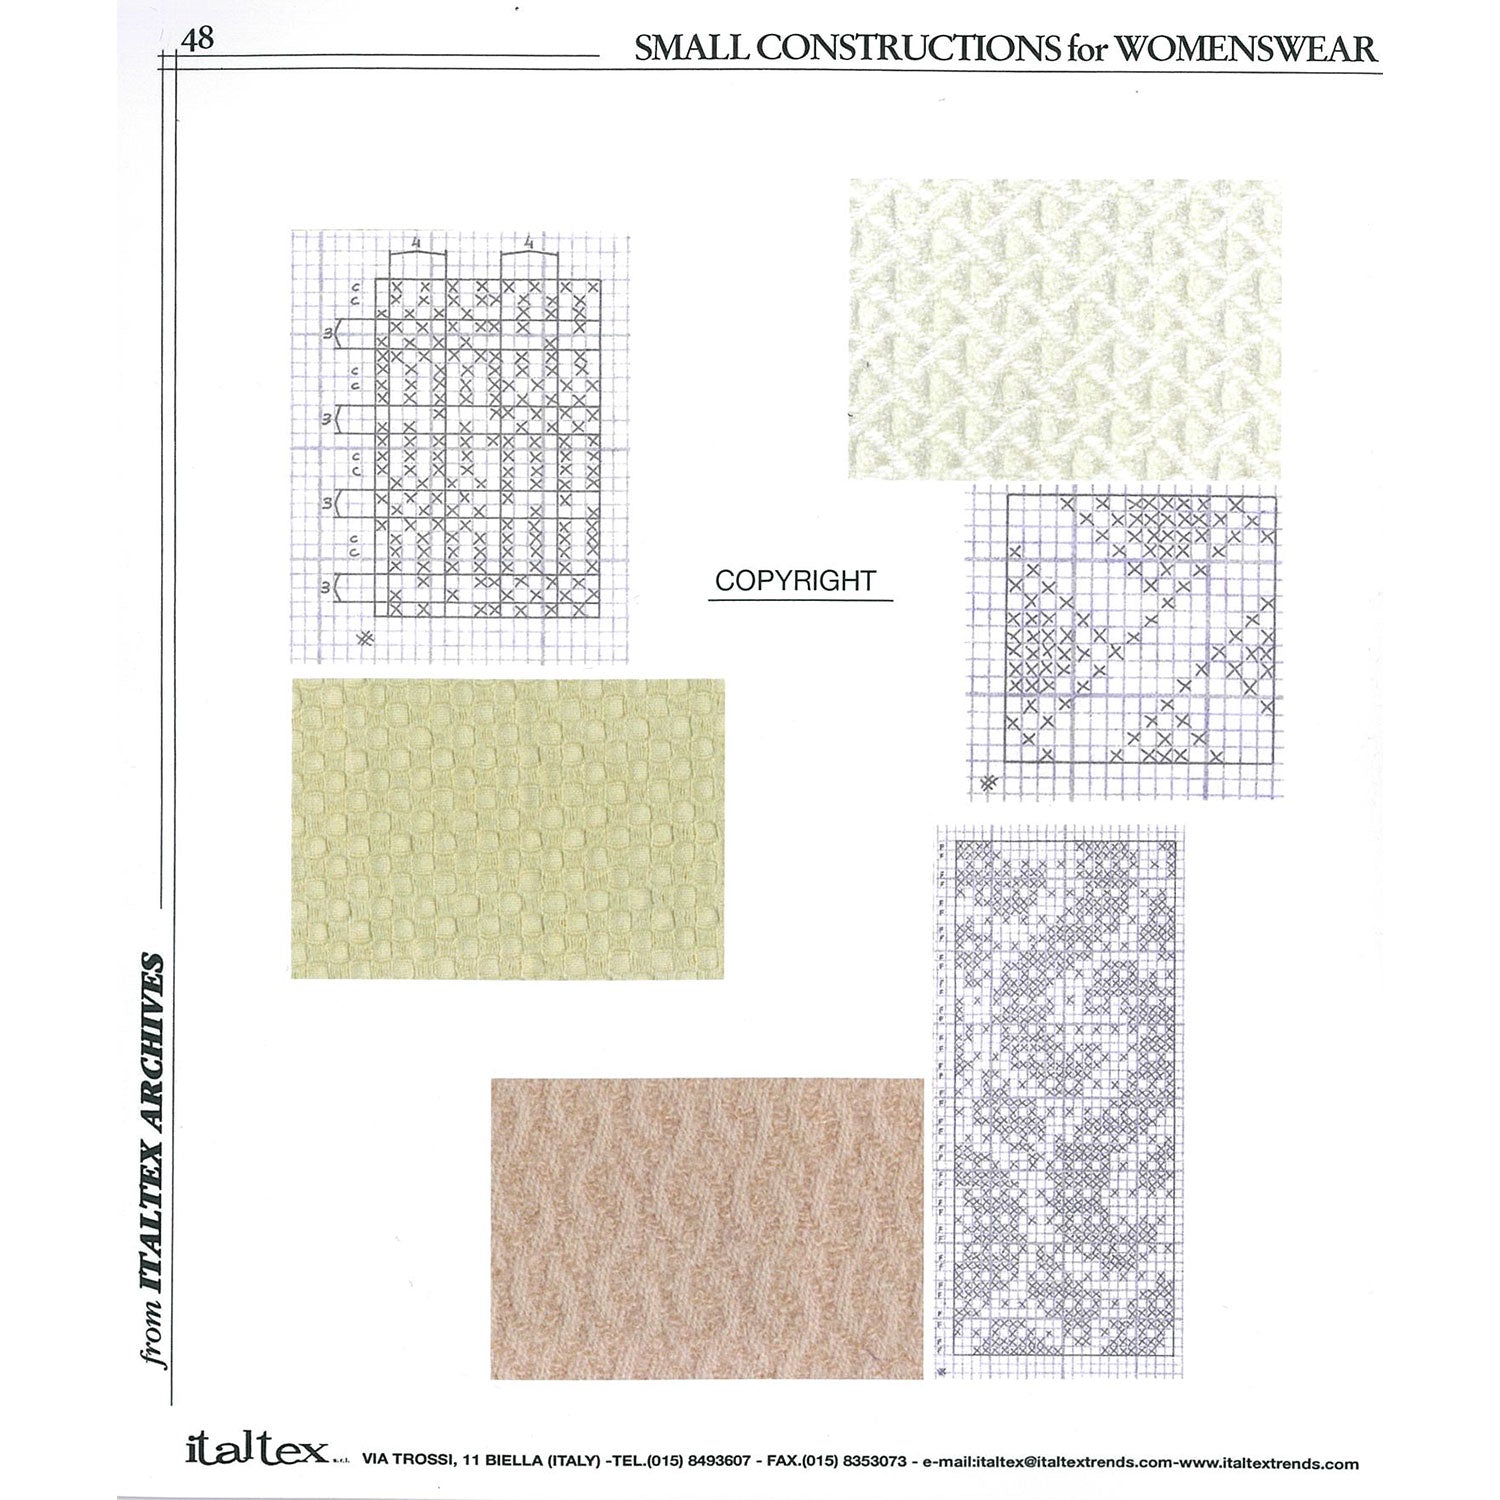 Three pictures of textured fabrics for women's wear with their weaves. One is a white fabric with a ribbed ground and a grid effect on it. One is a beige fabric with a burnt out effect that is instead the result of a special weave. One is a pinkish jacquard fabric drawing S shapes creating a braid pattern